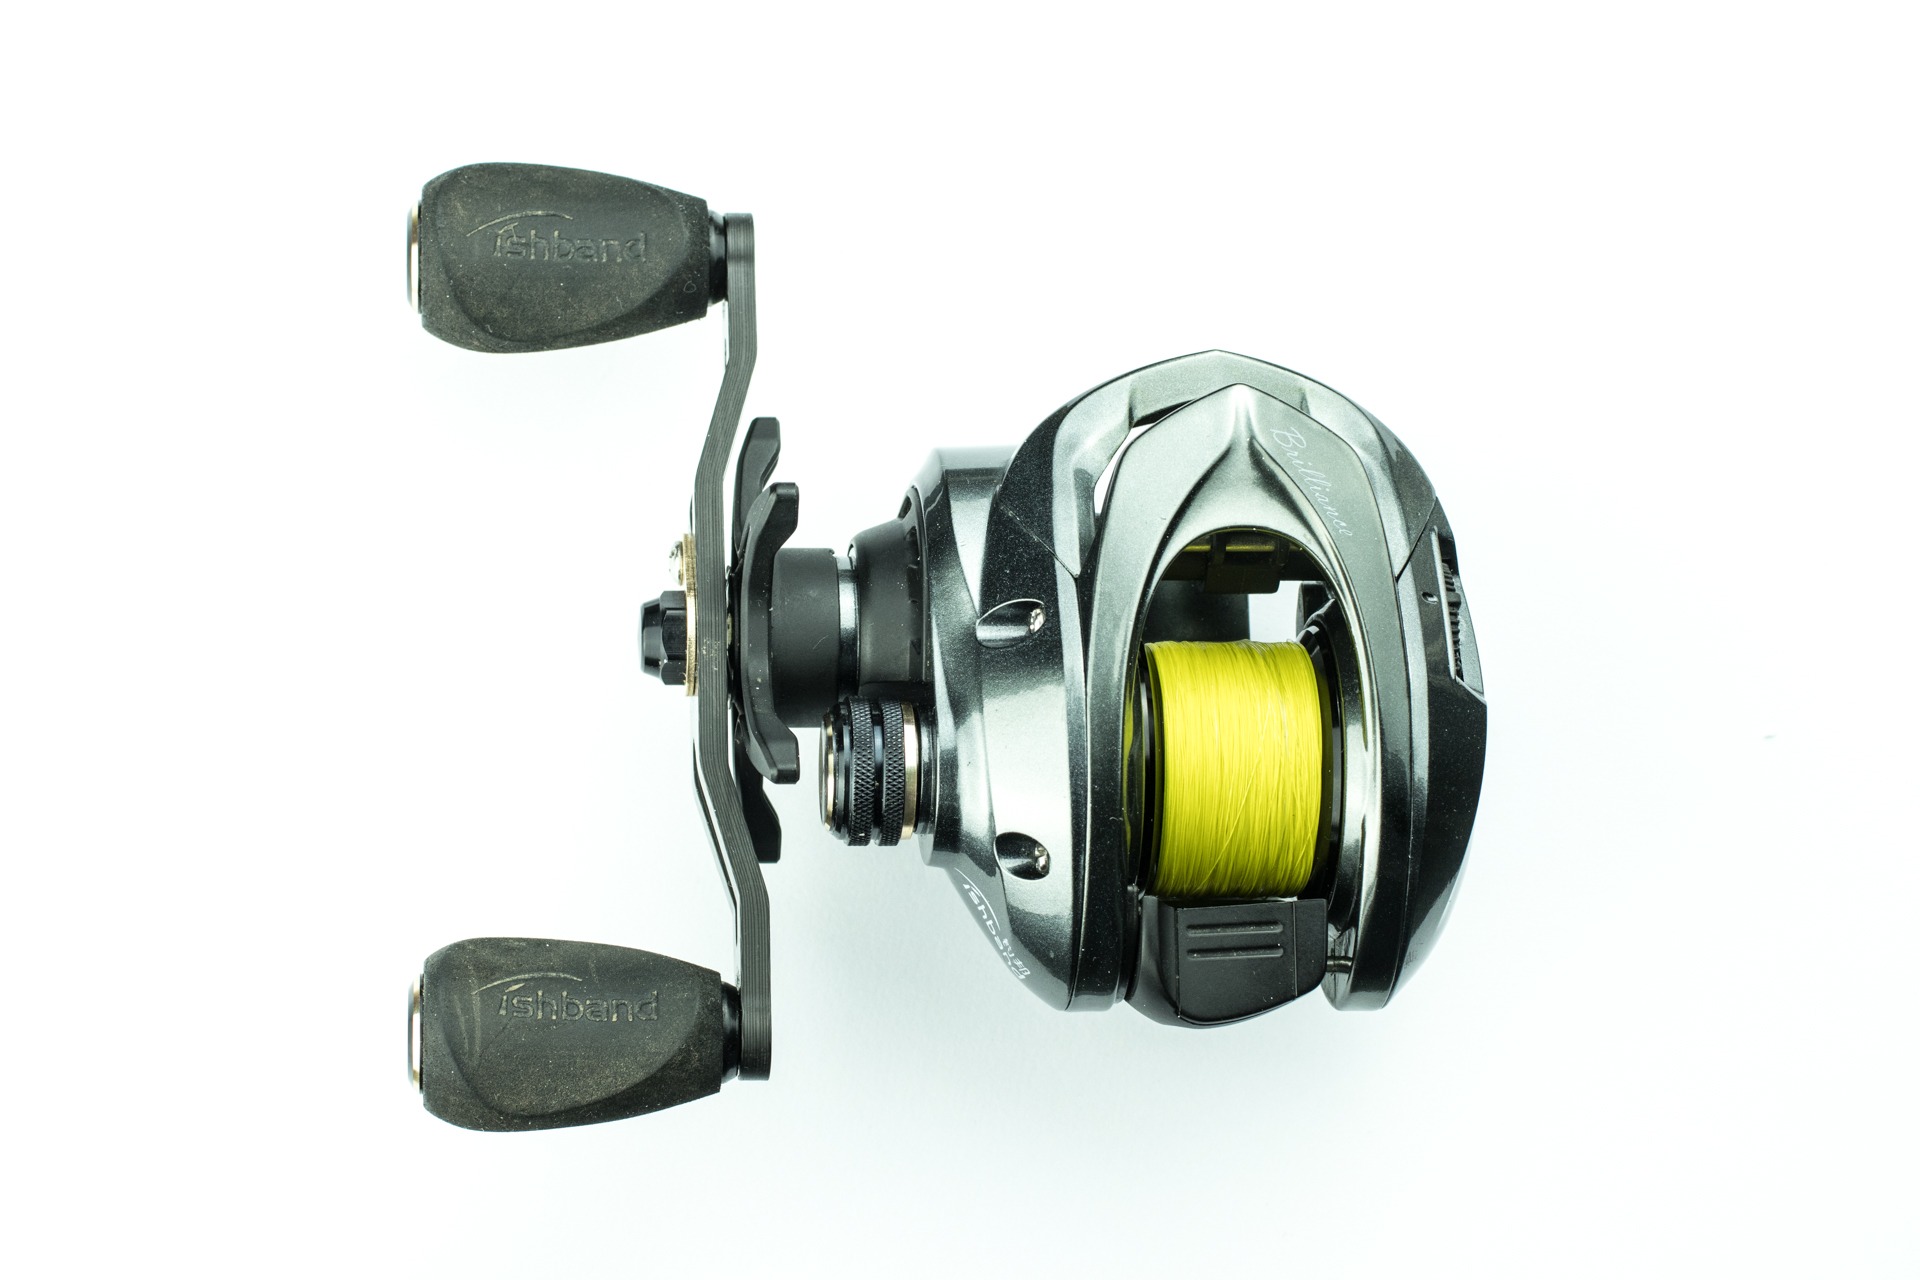 Best Fly Fishing Reels 2019 Buyer's Guide & Review